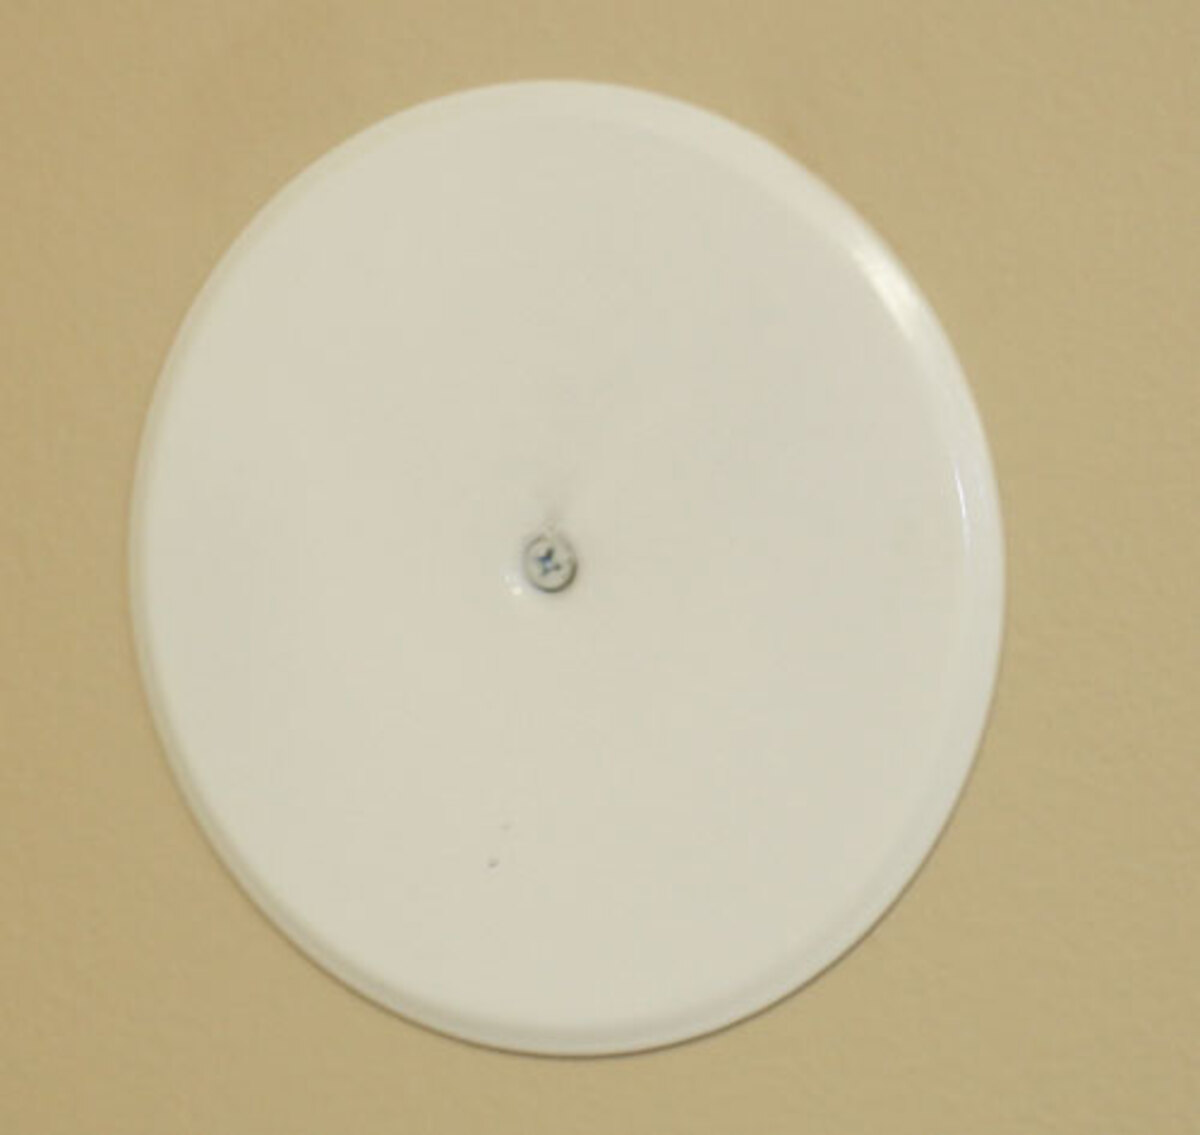 5" Round Ceiling Blank Cover - Universal Fit